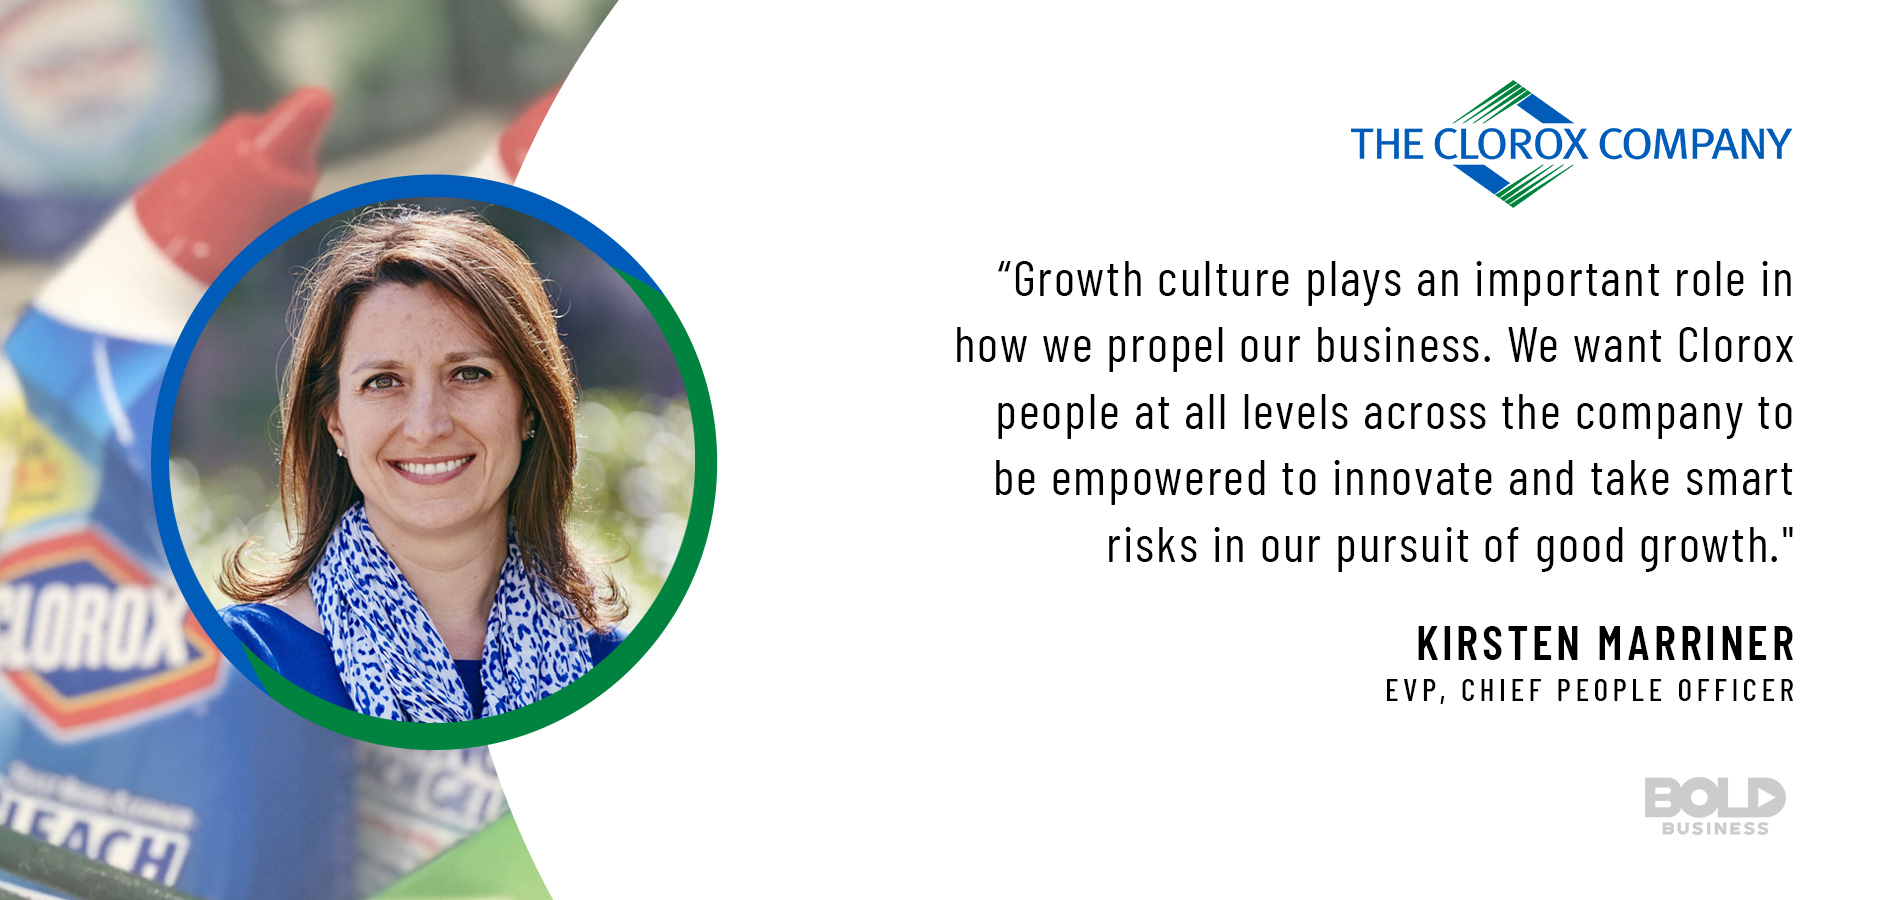 The cornerstones of the Clorox Company culture include diversity and inclusion.